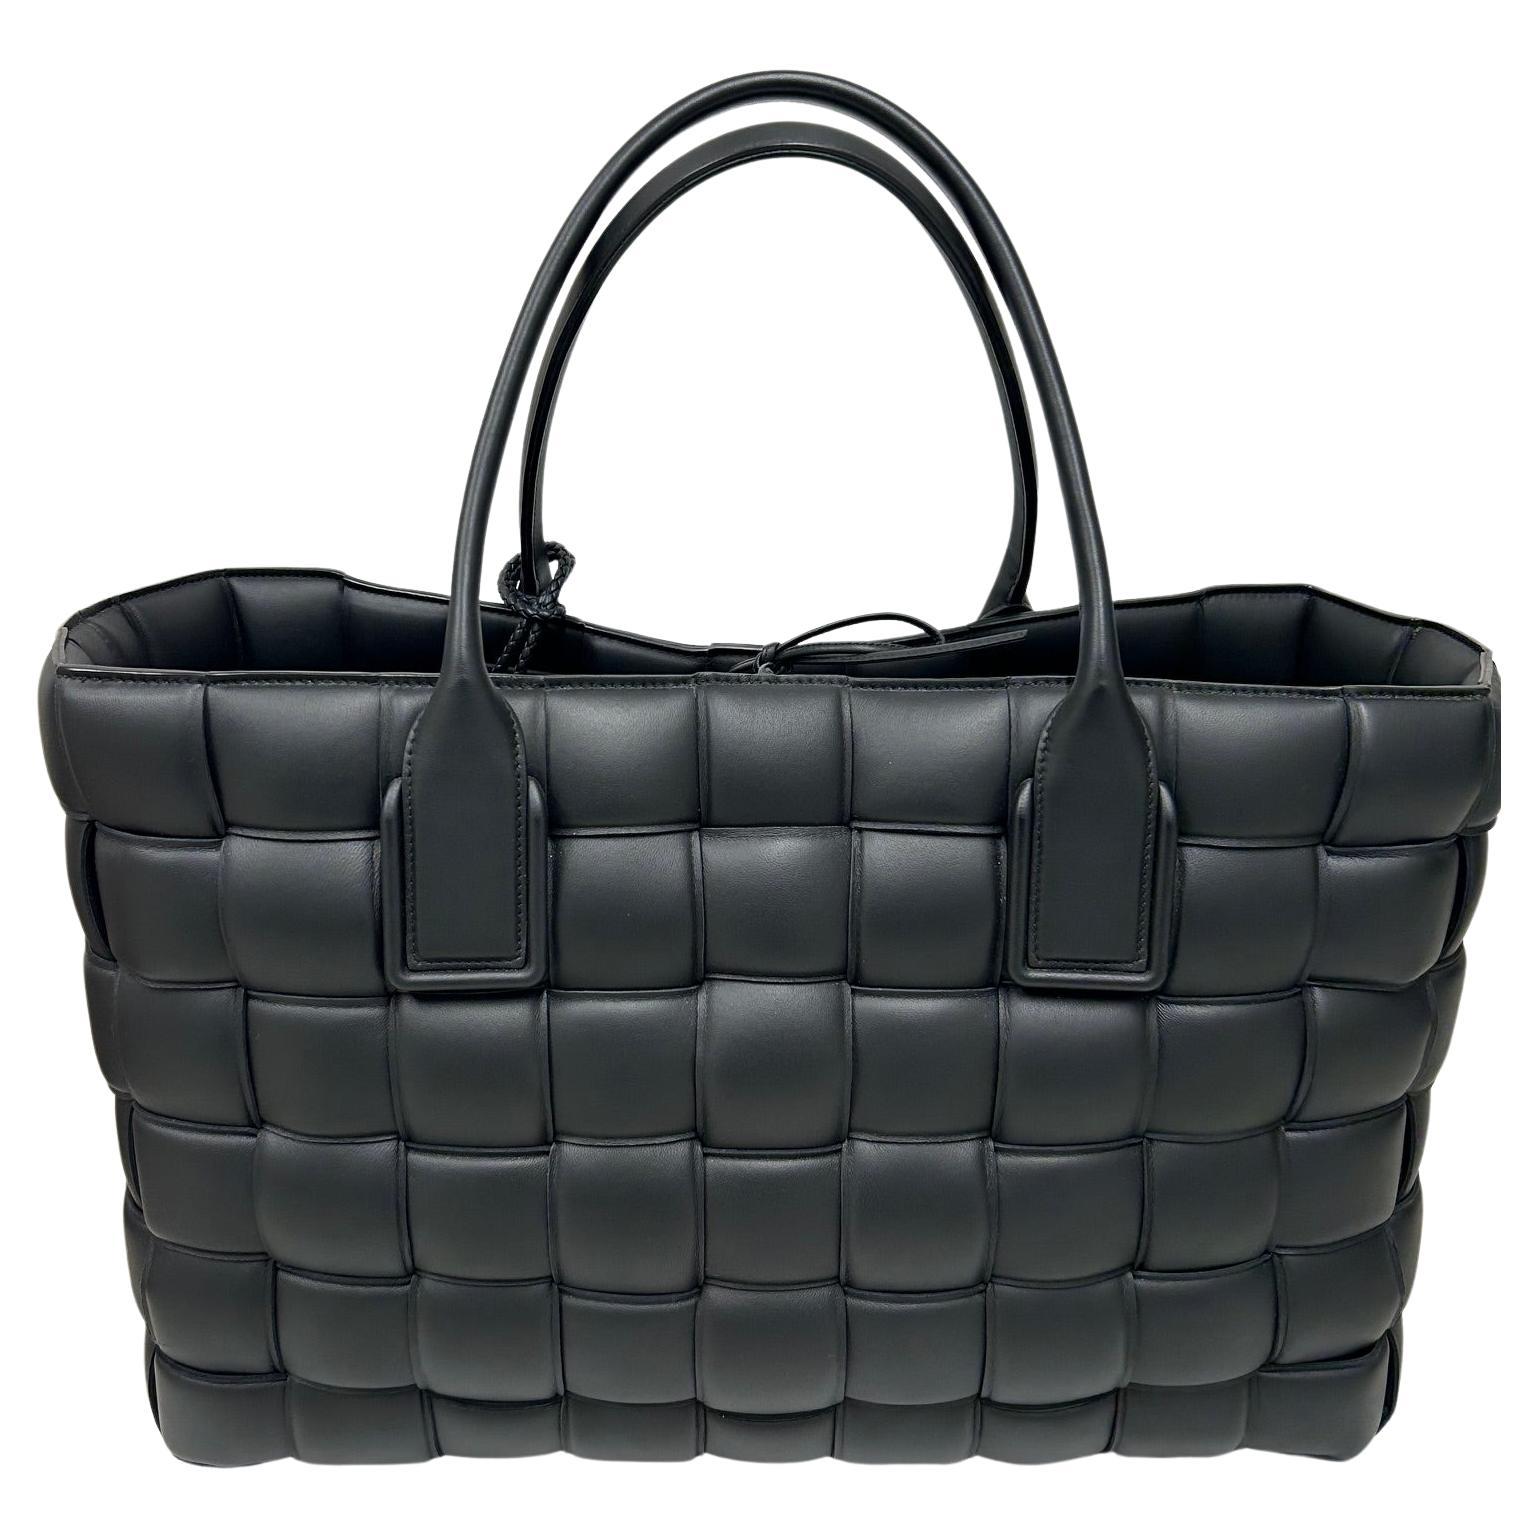 - Bottega Veneta Black Padded Cabat (Lambskin) limited edition
- Brand New never used from 2019 collection
- Includes key fob and cosmetic case
- Large Tote that can be carried for day or as an overnight bag
- Designed by Daniel Lee
- Handcrafted